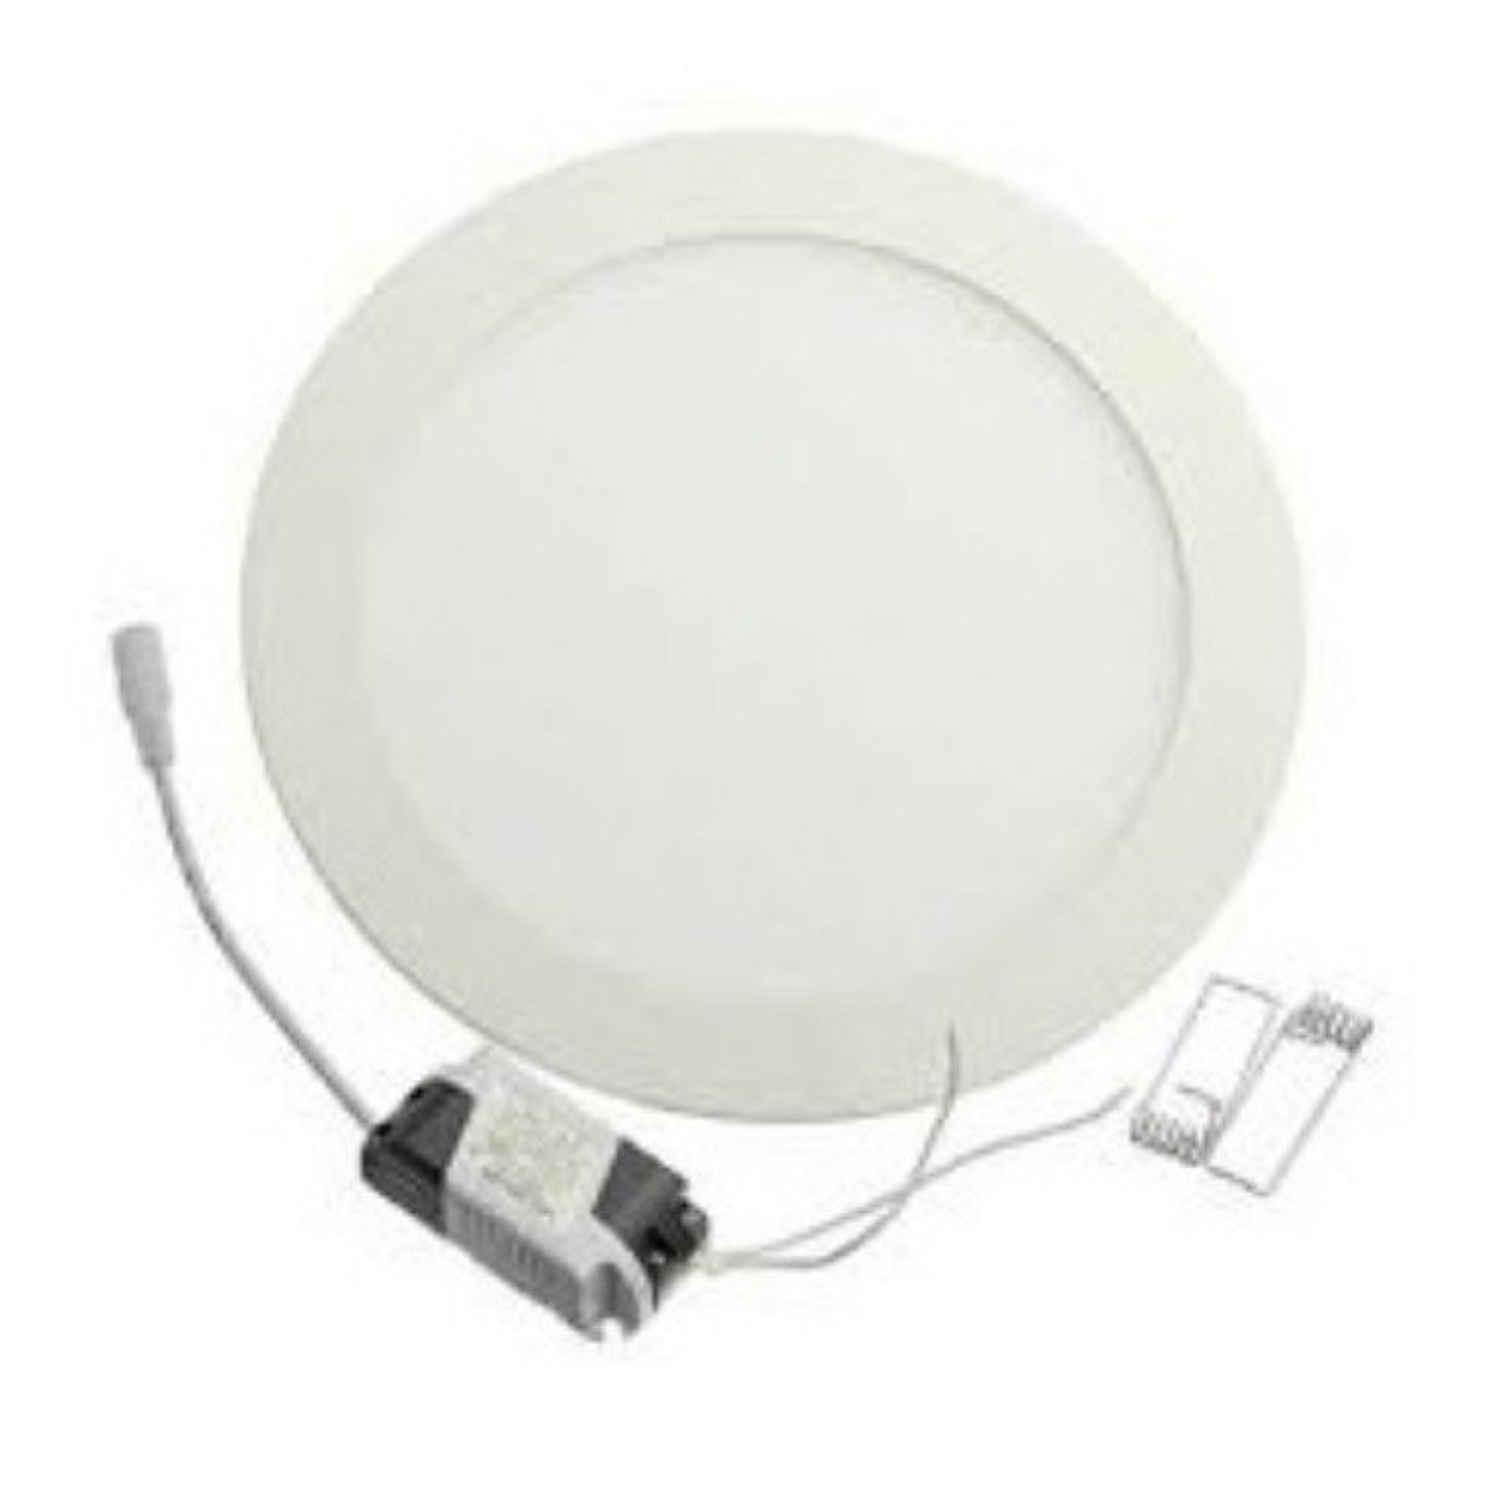 Orient Electric  3W LED Down Light, Cool White Light, Round, Recessed Ceiling LED Light